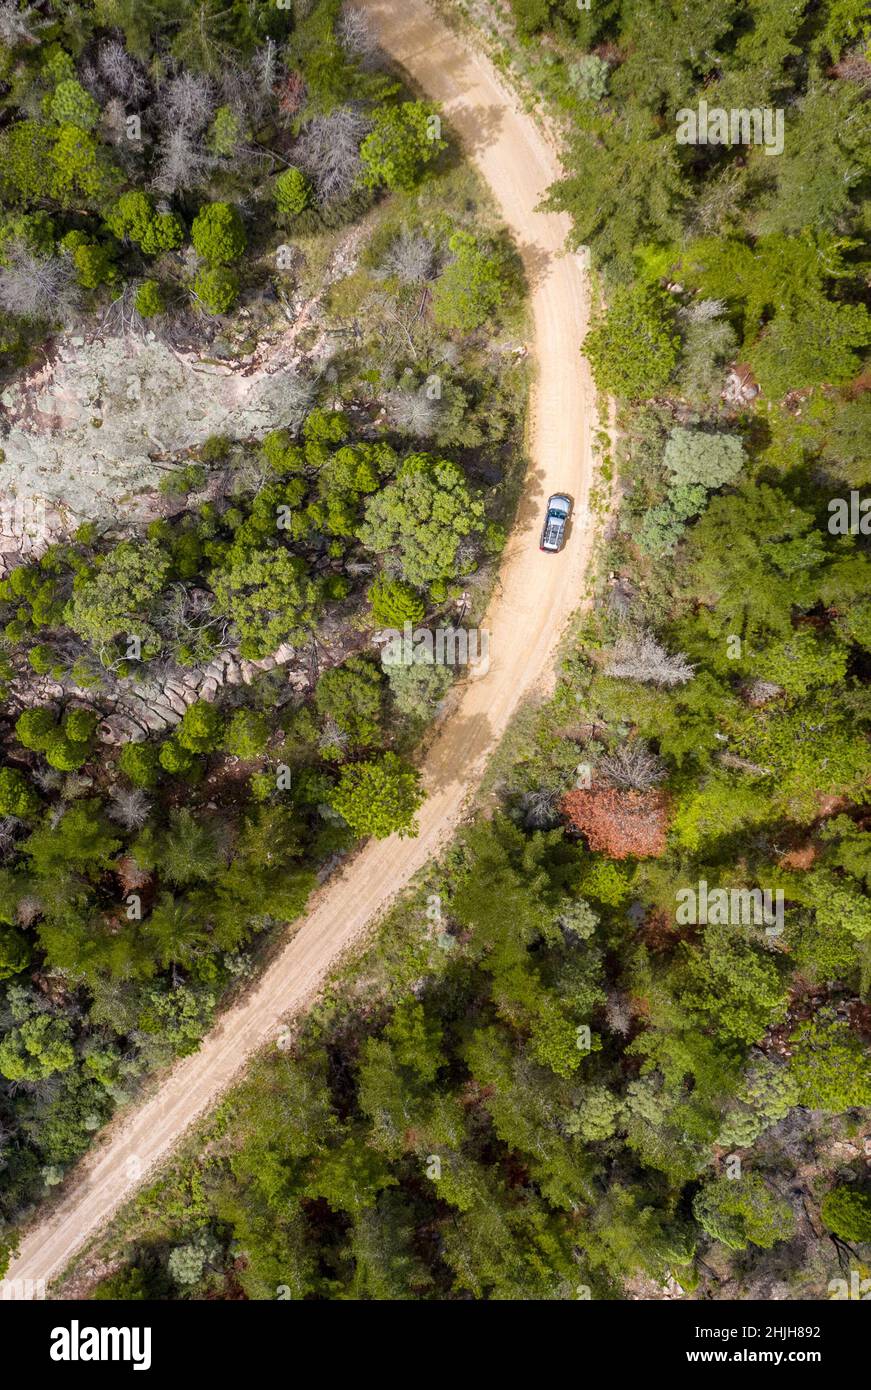 Beautiful aerial view of a country road in a forest. Stock Photo